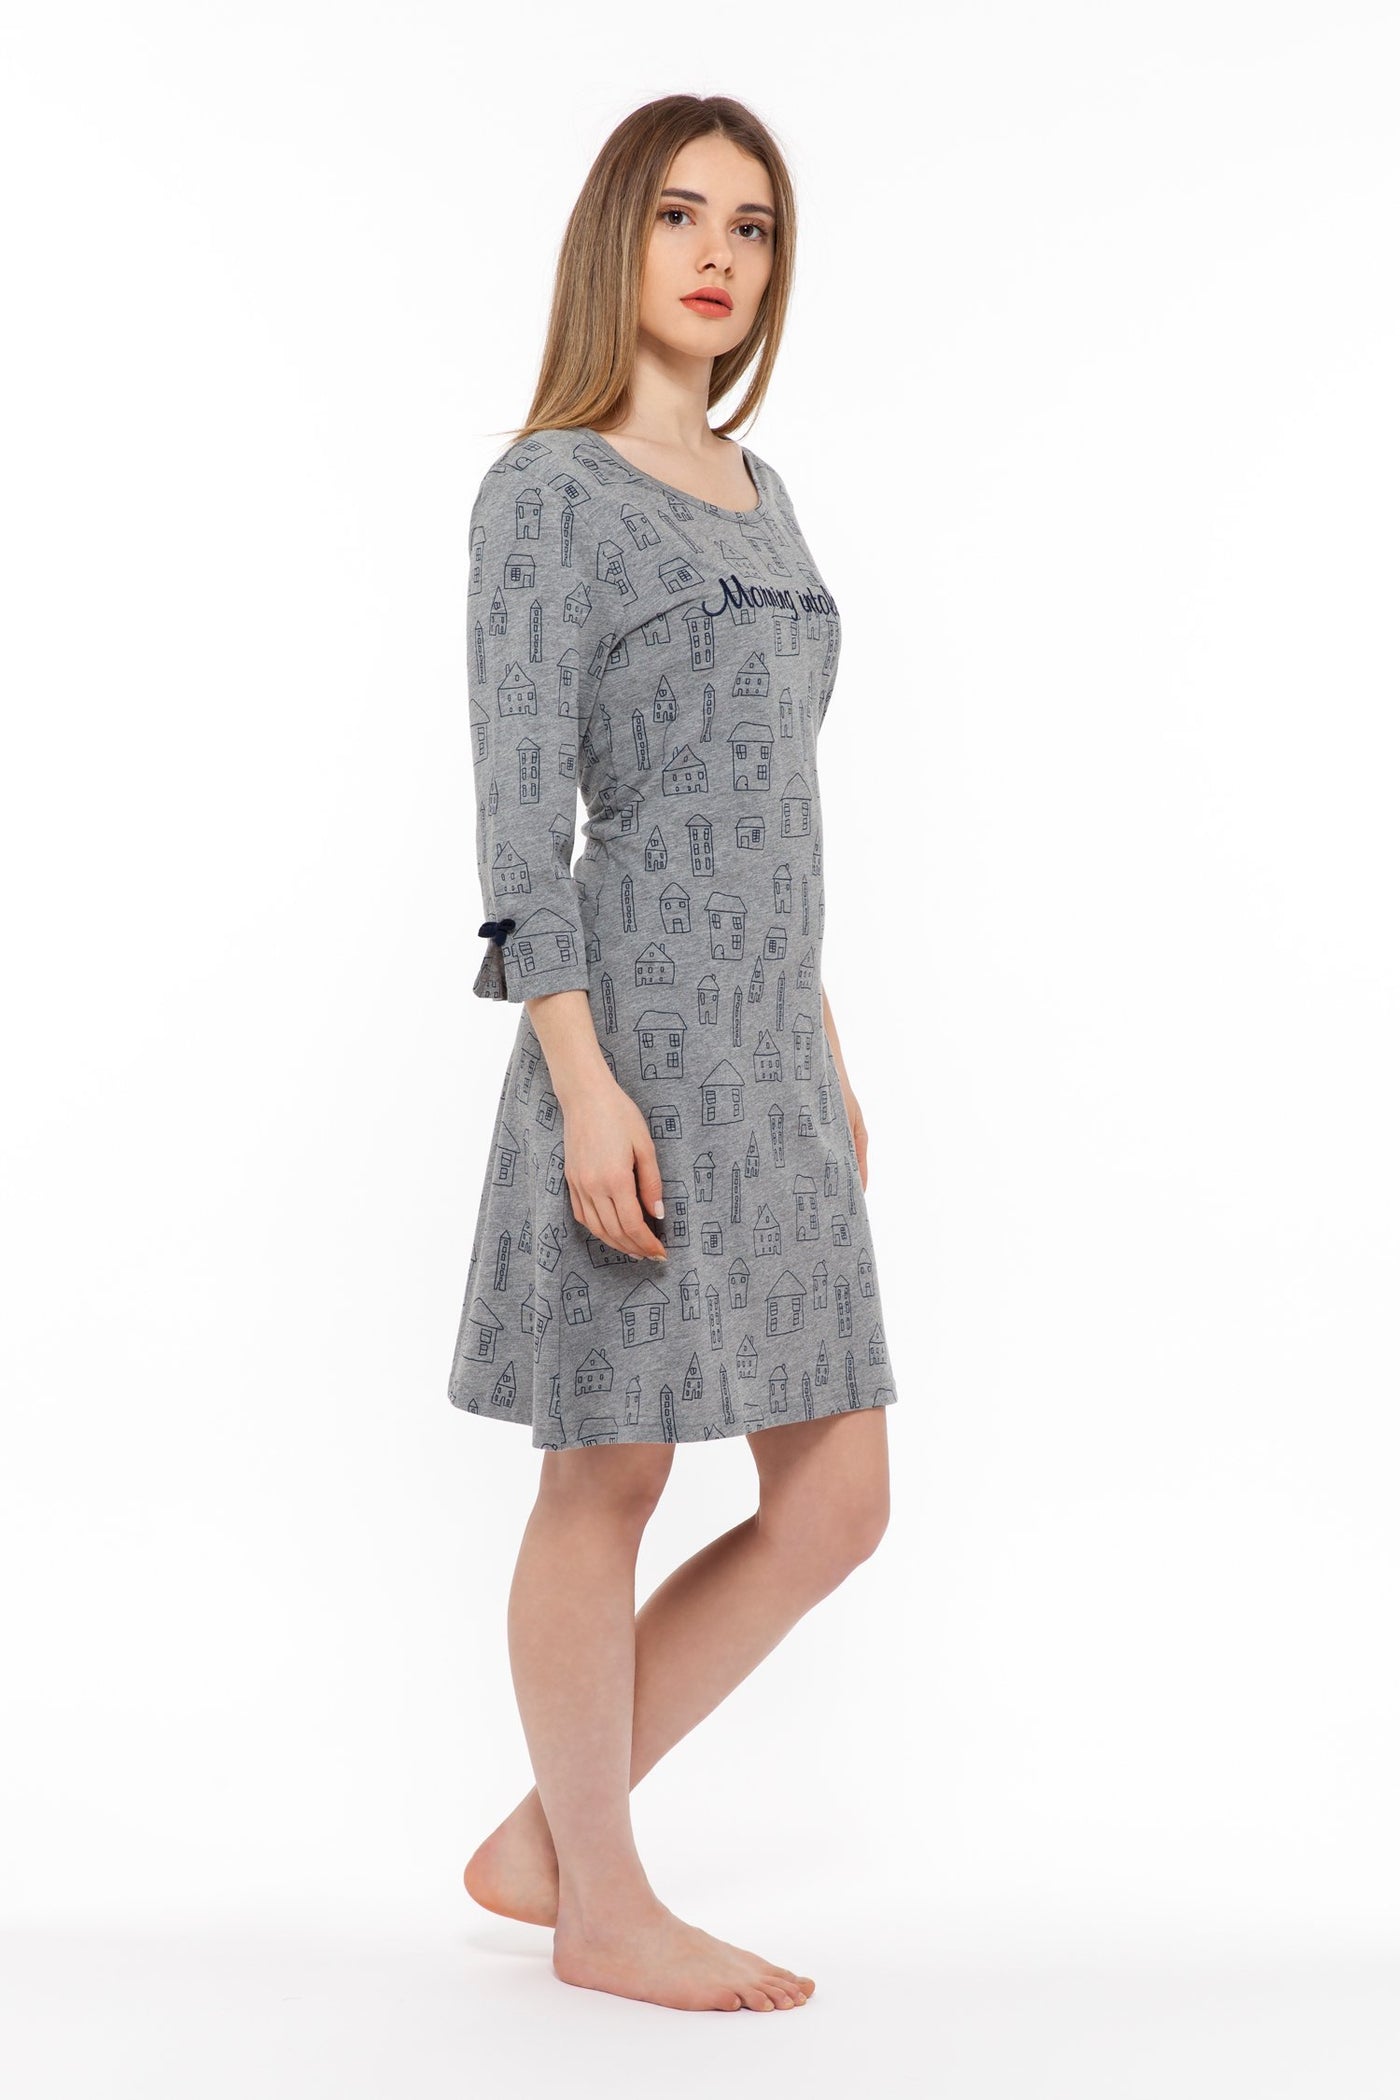 chassca morning intolerant 3/4 sleeve nightdress with house print - Breakmood